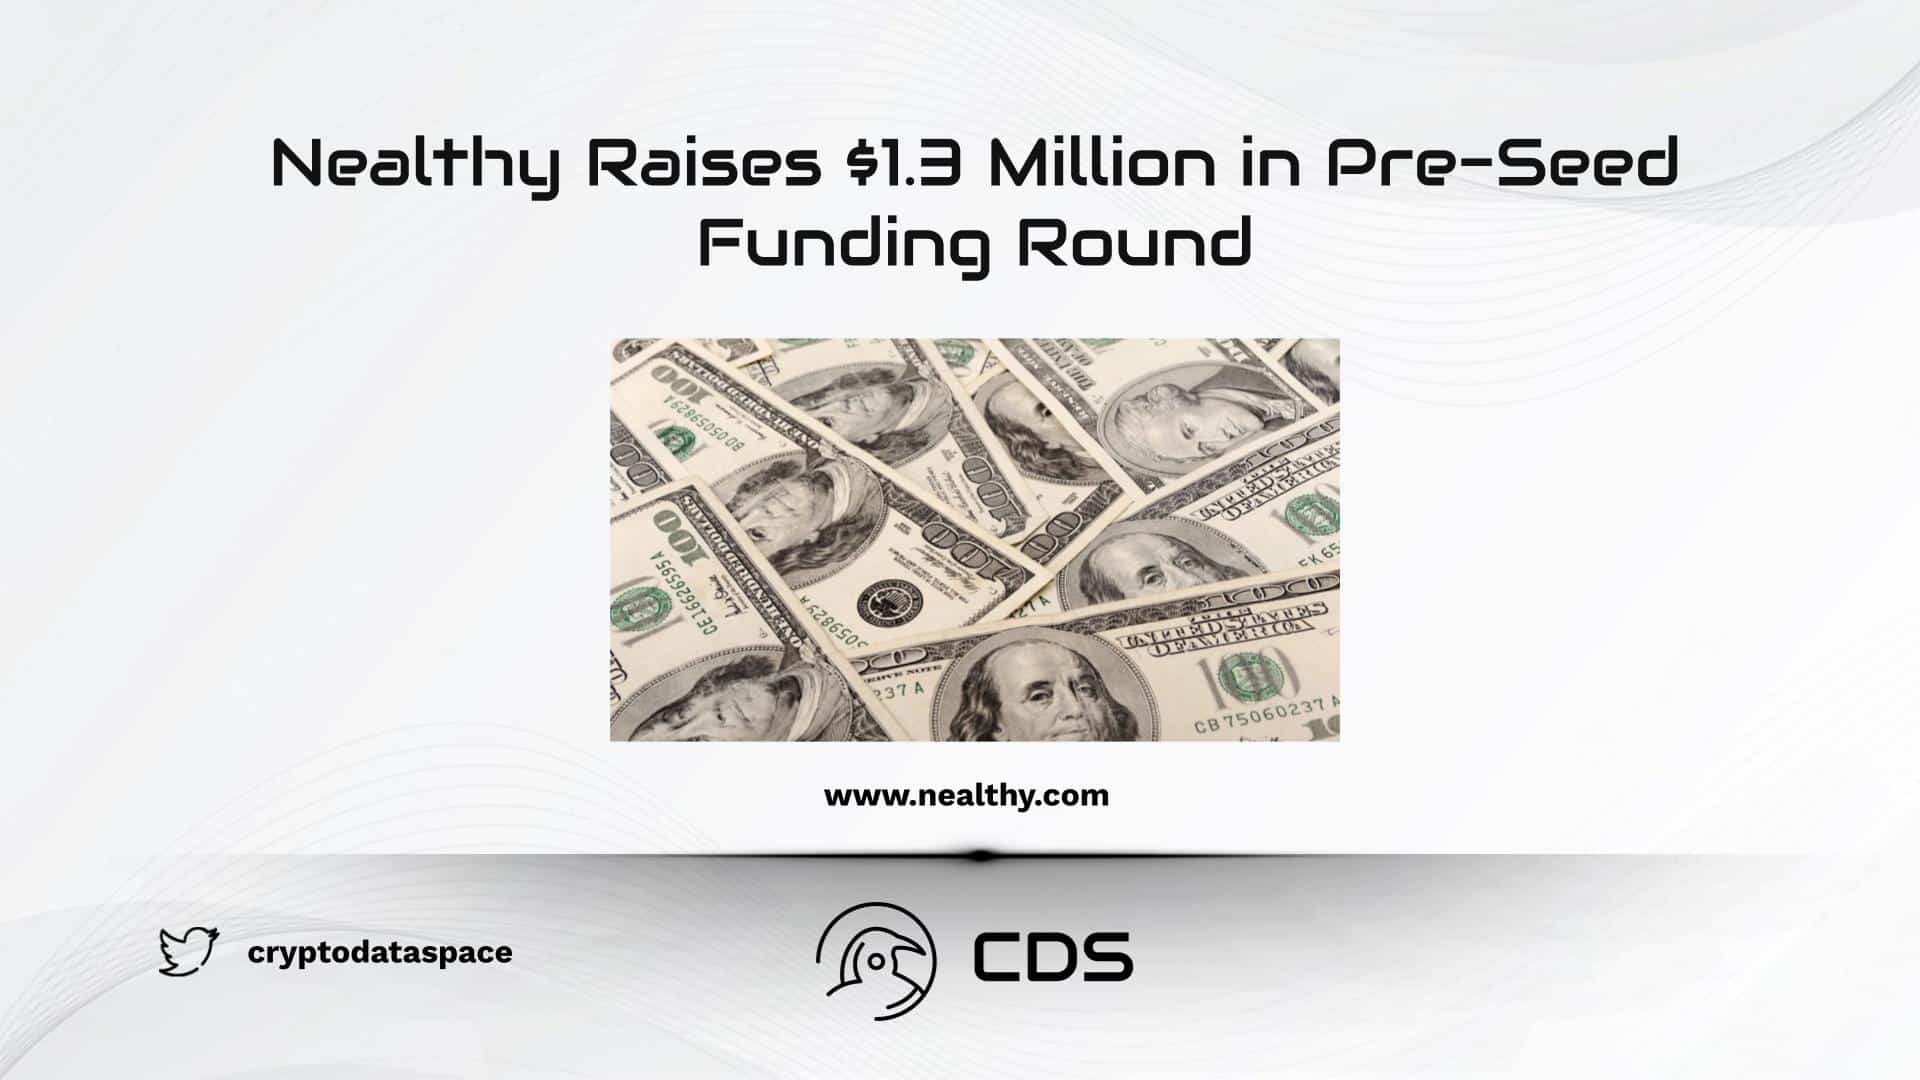 Nealthy Raises $1.3 Million in Pre-Seed Funding Round